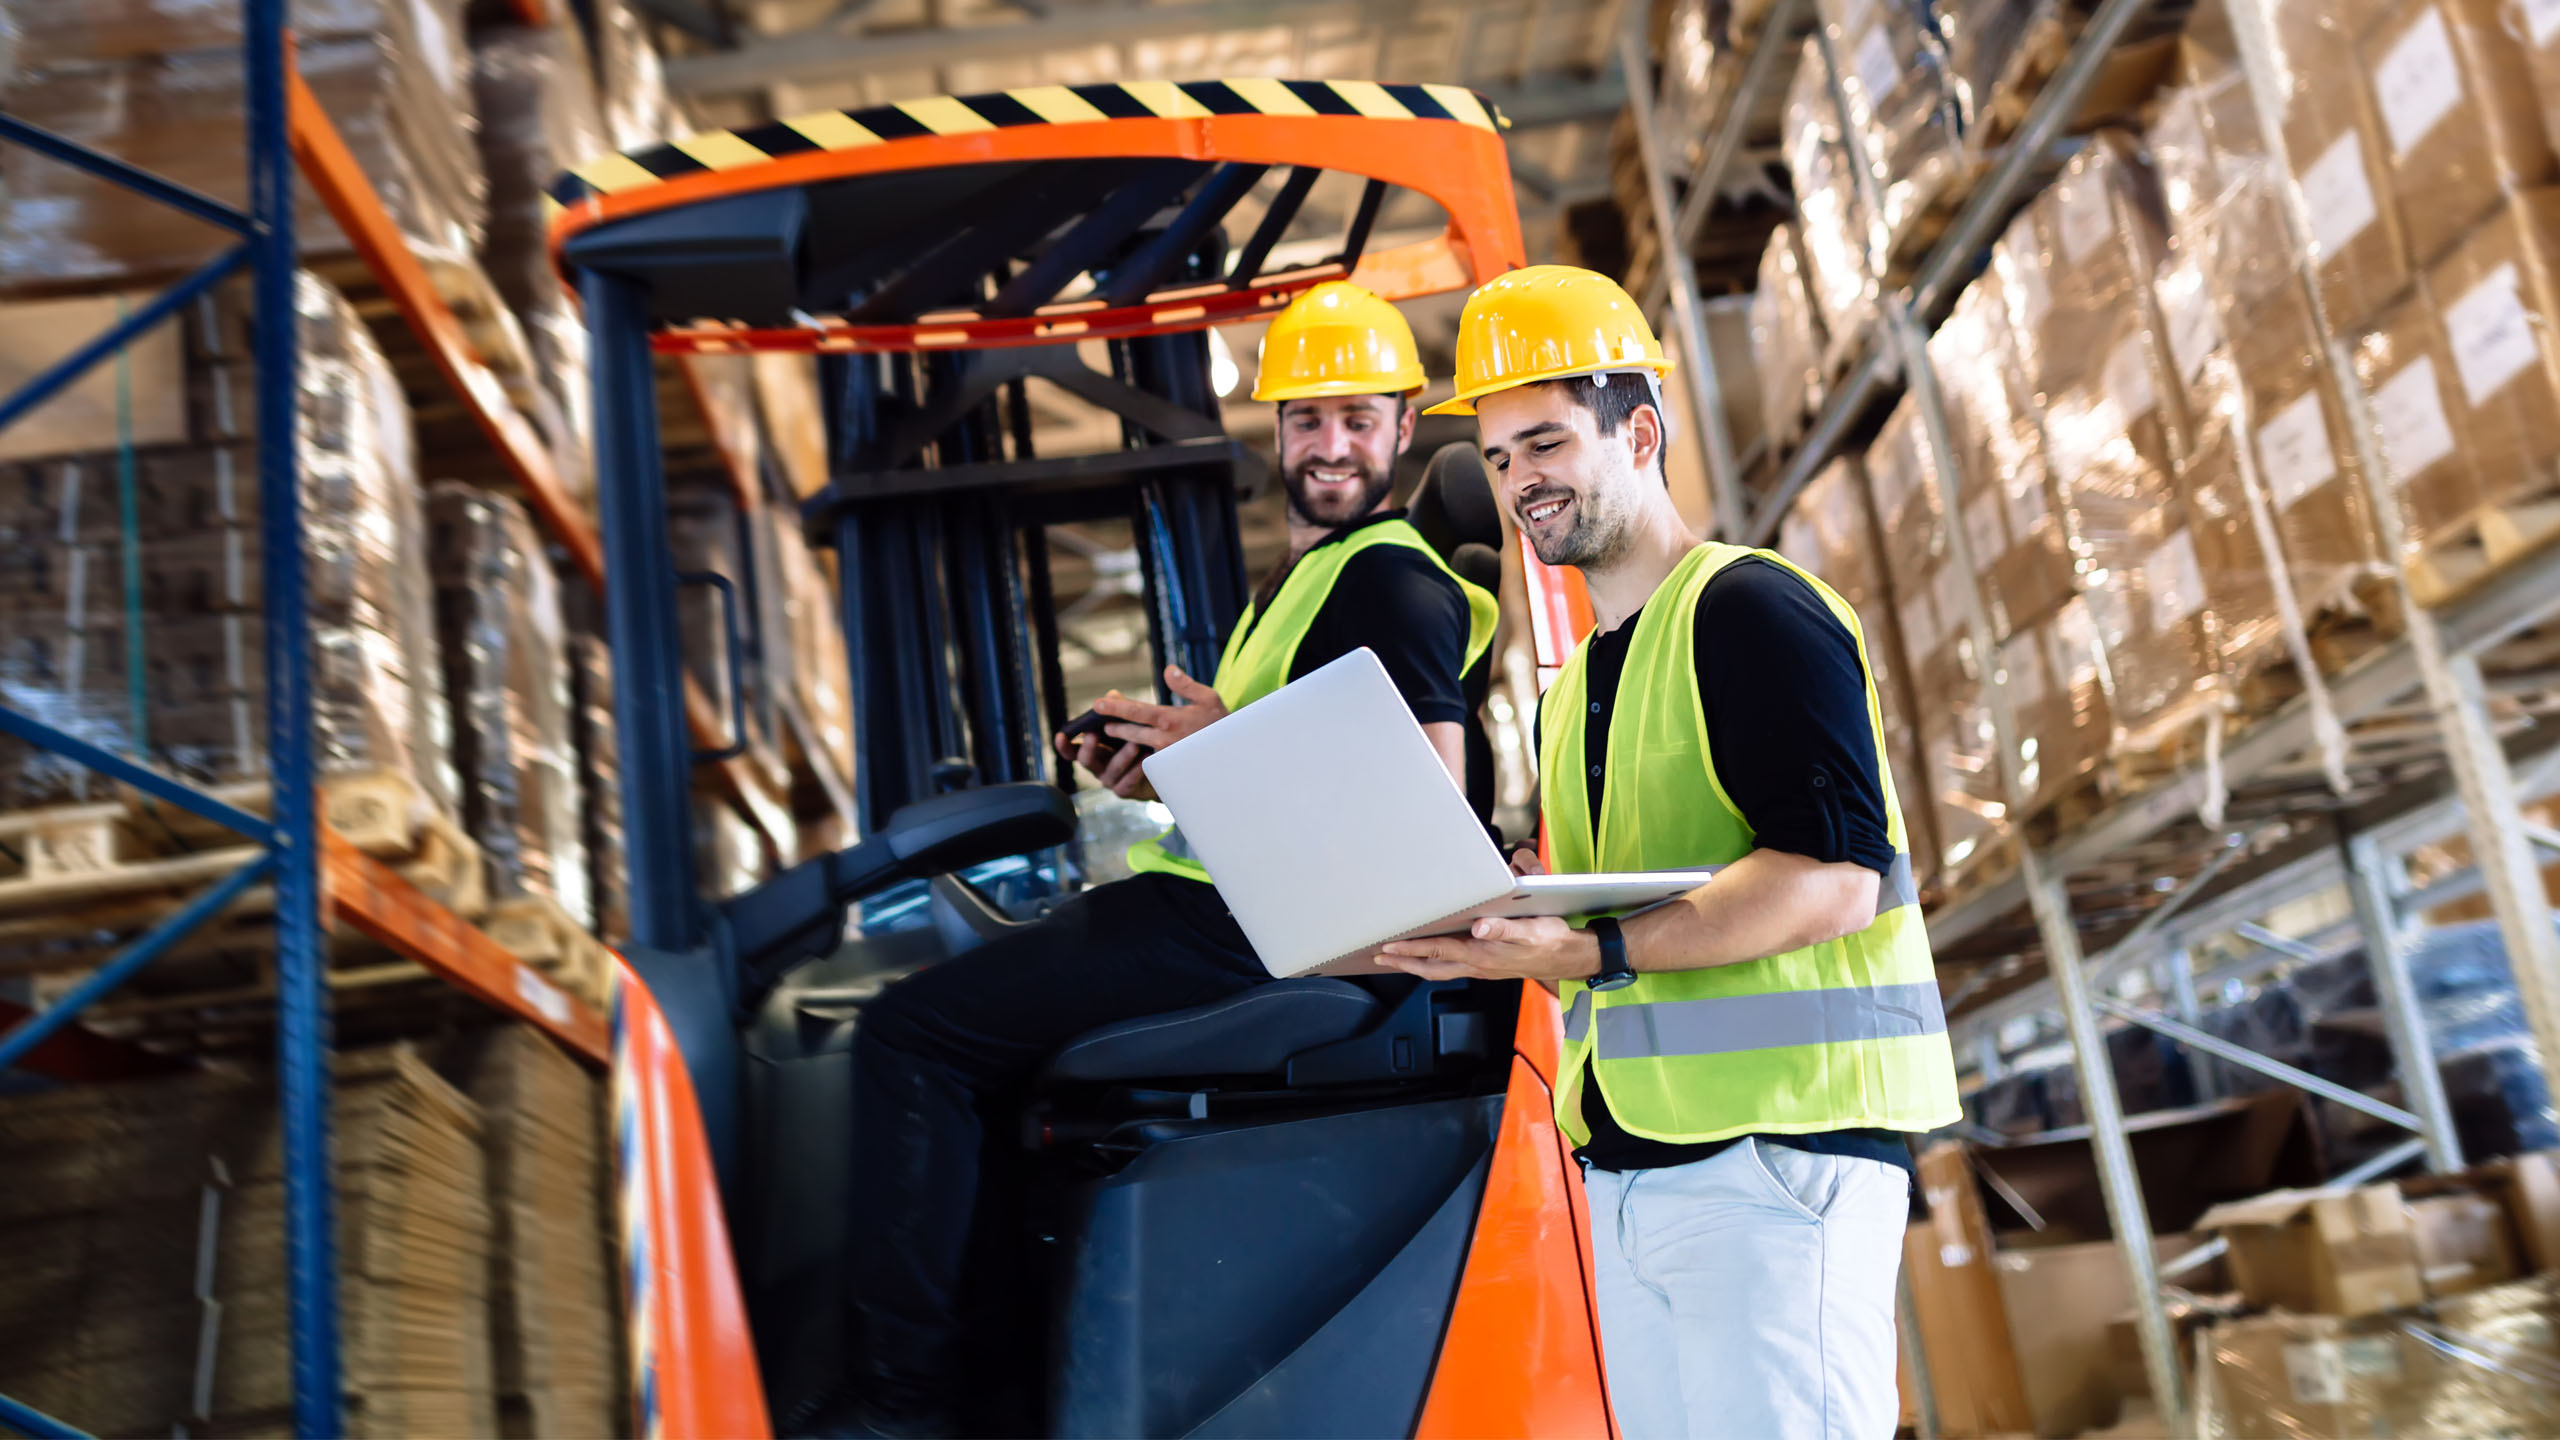 10 Indicators to Monitor Your Warehouse Performance